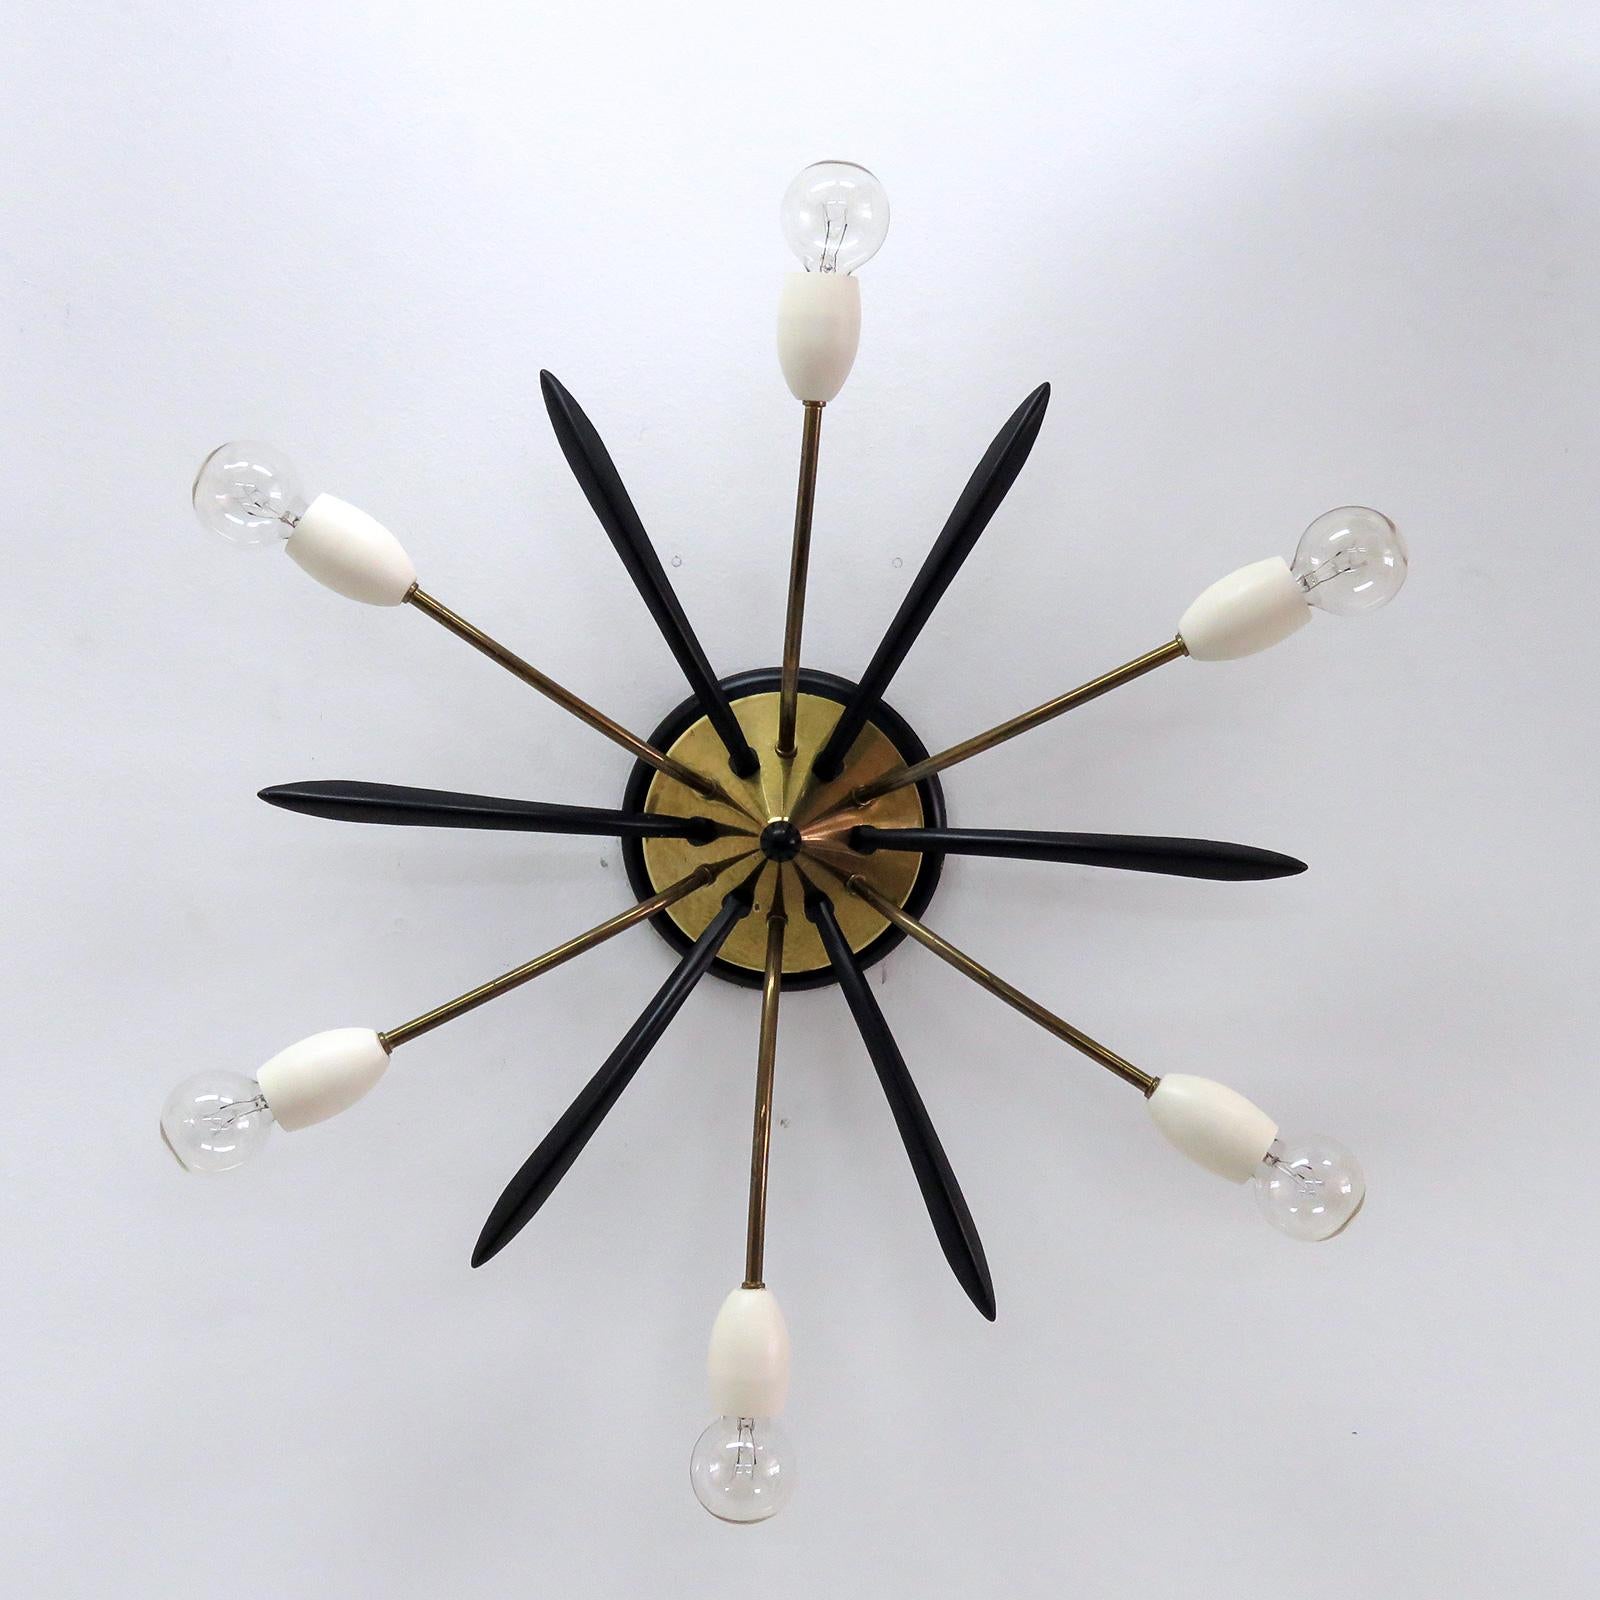 Wonderful German six-arm Sputnik fixture in brass and enameled metal can be used as wall or ceiling light, wired for US standards, six E12 sockets, max. wattage 40w per socket, bulbs provided as a onetime courtesy.